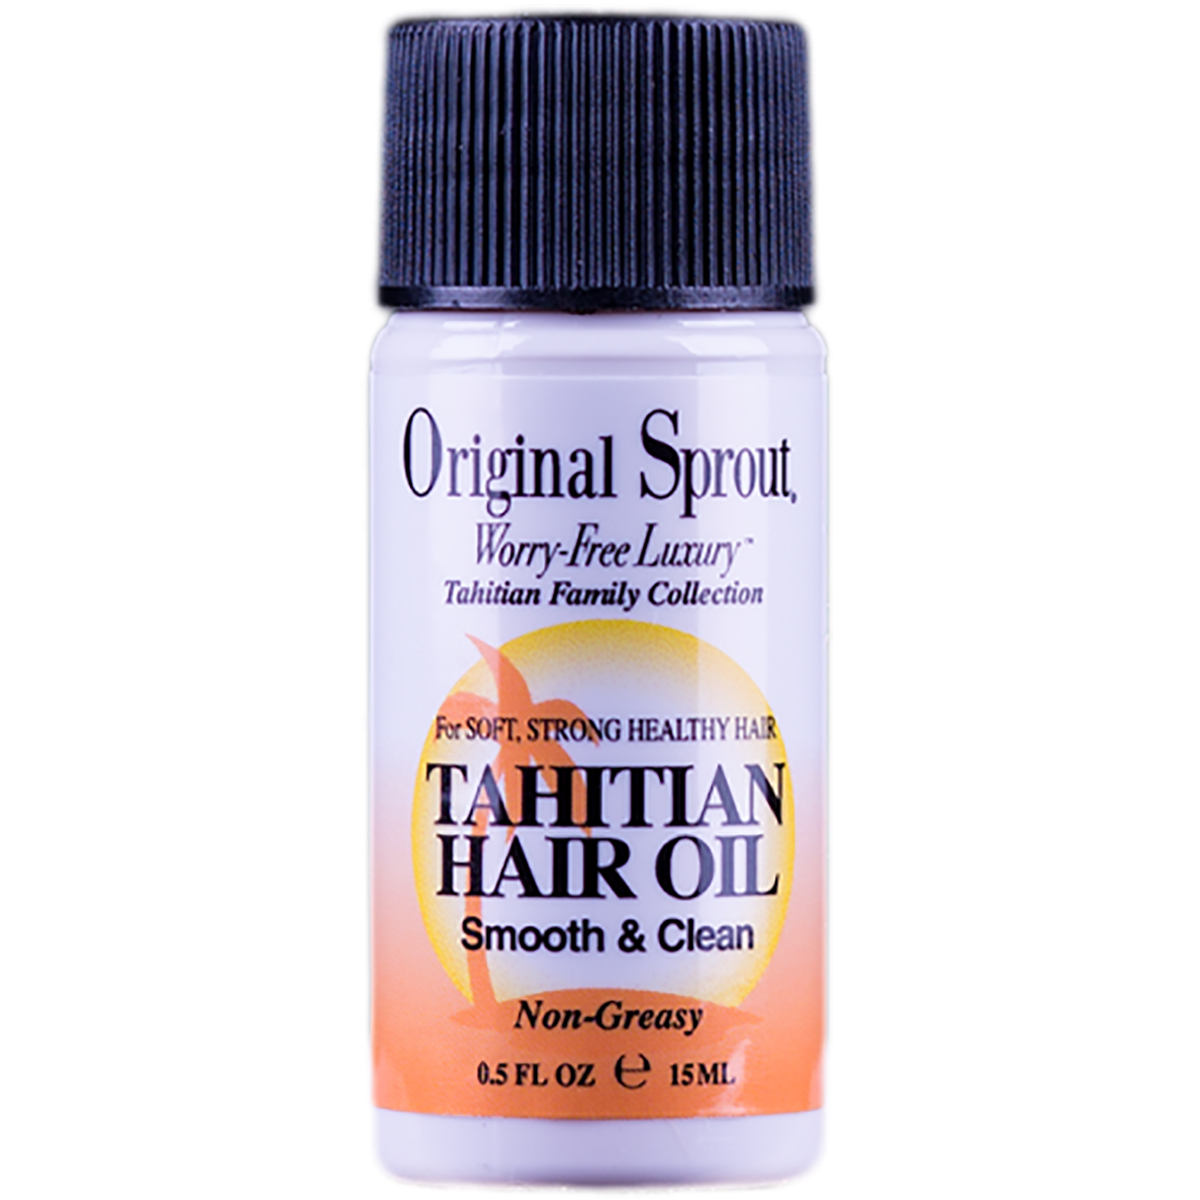 Original Sprout Tahitian Hair Oil for All Hair Types, 0.5oz